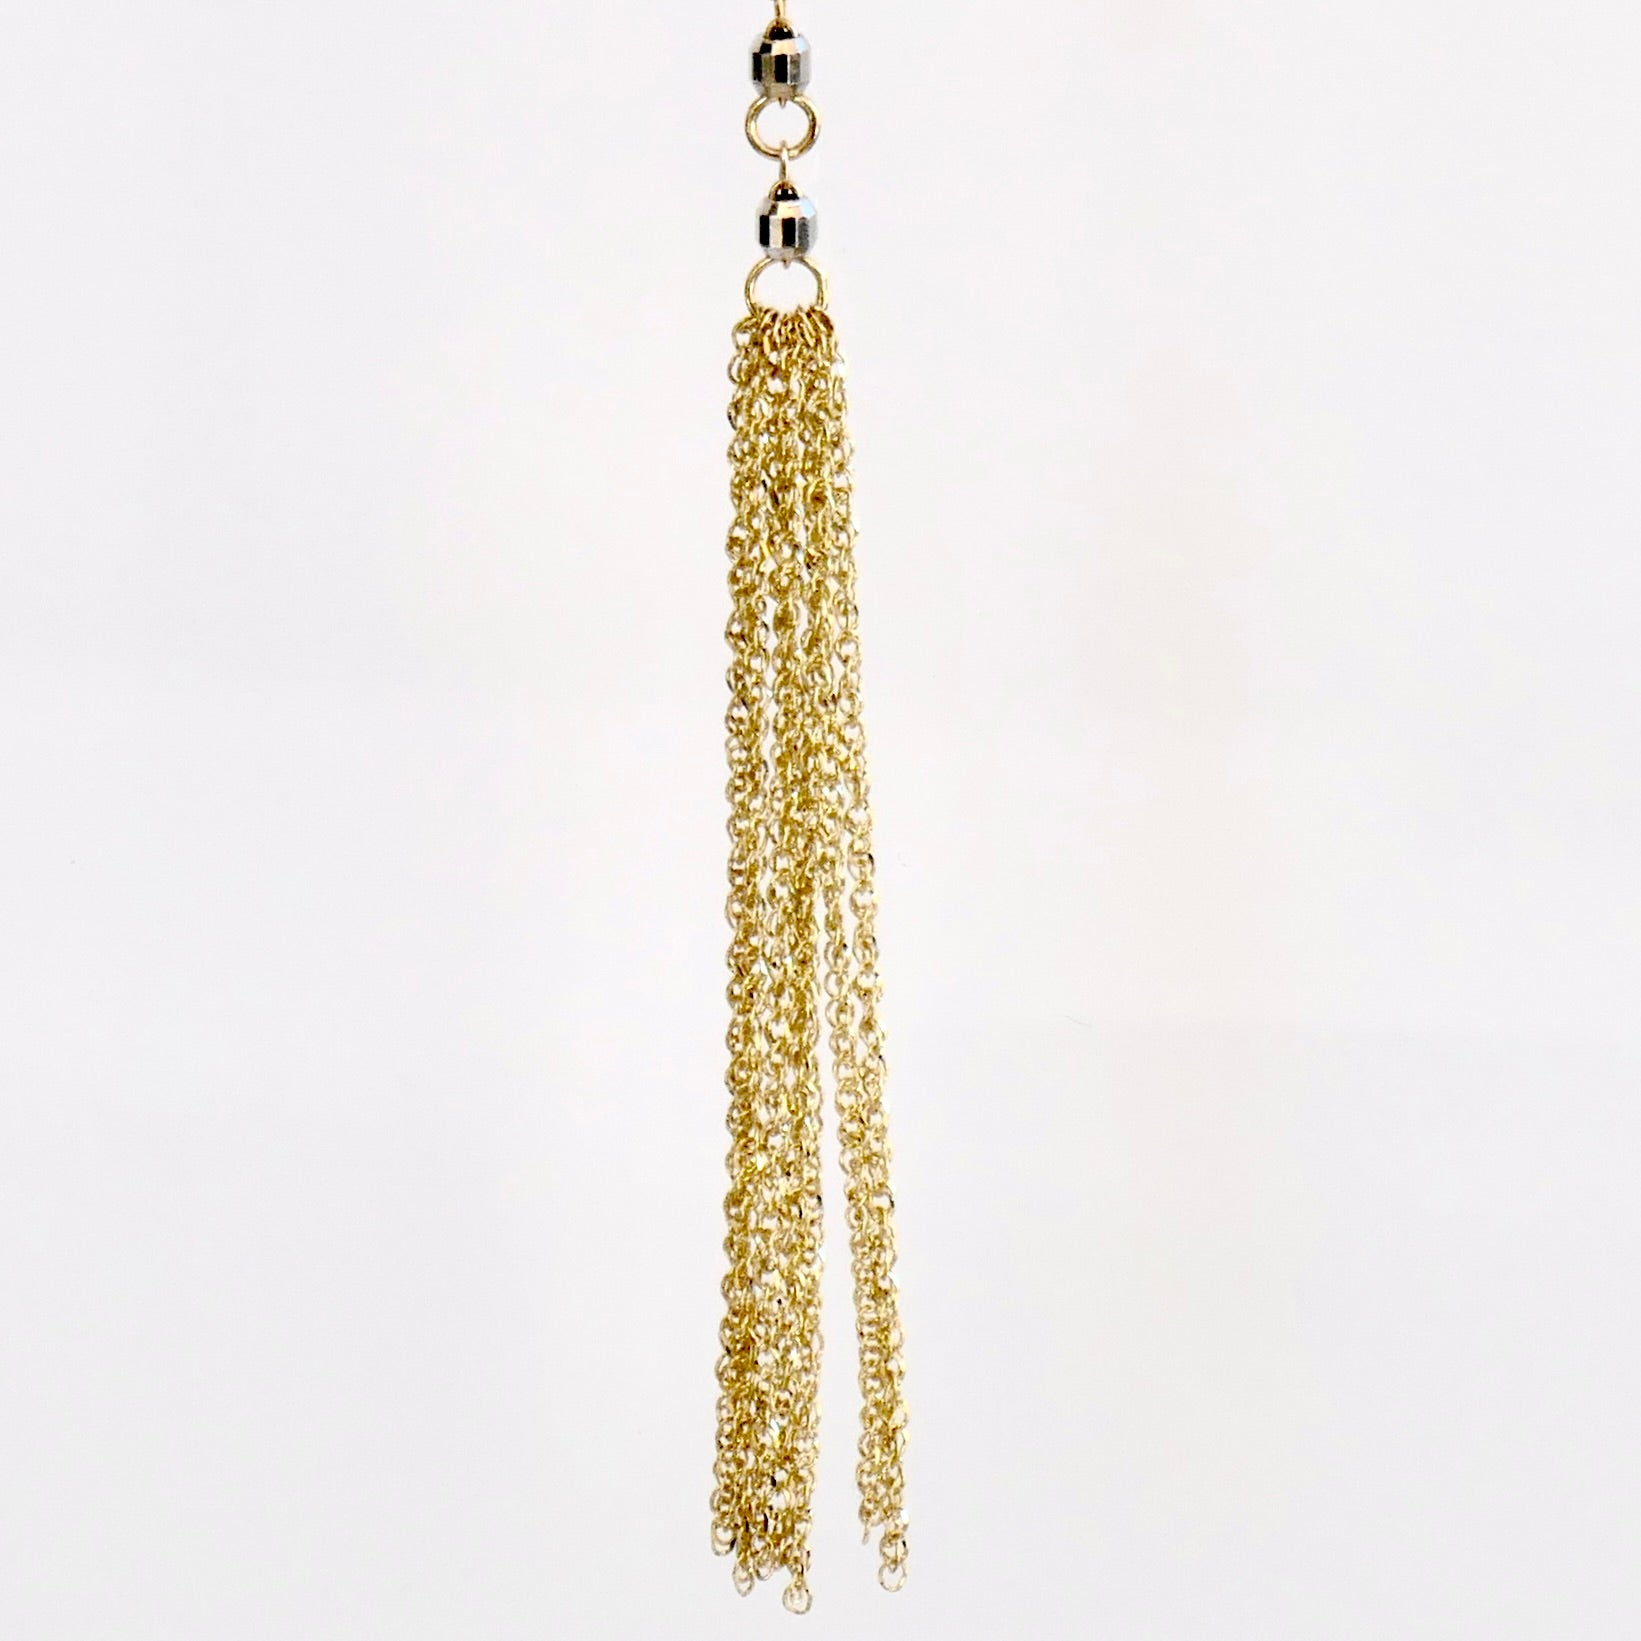 10K Yellow Gold Beaded Y Necklace with Chain Tassel